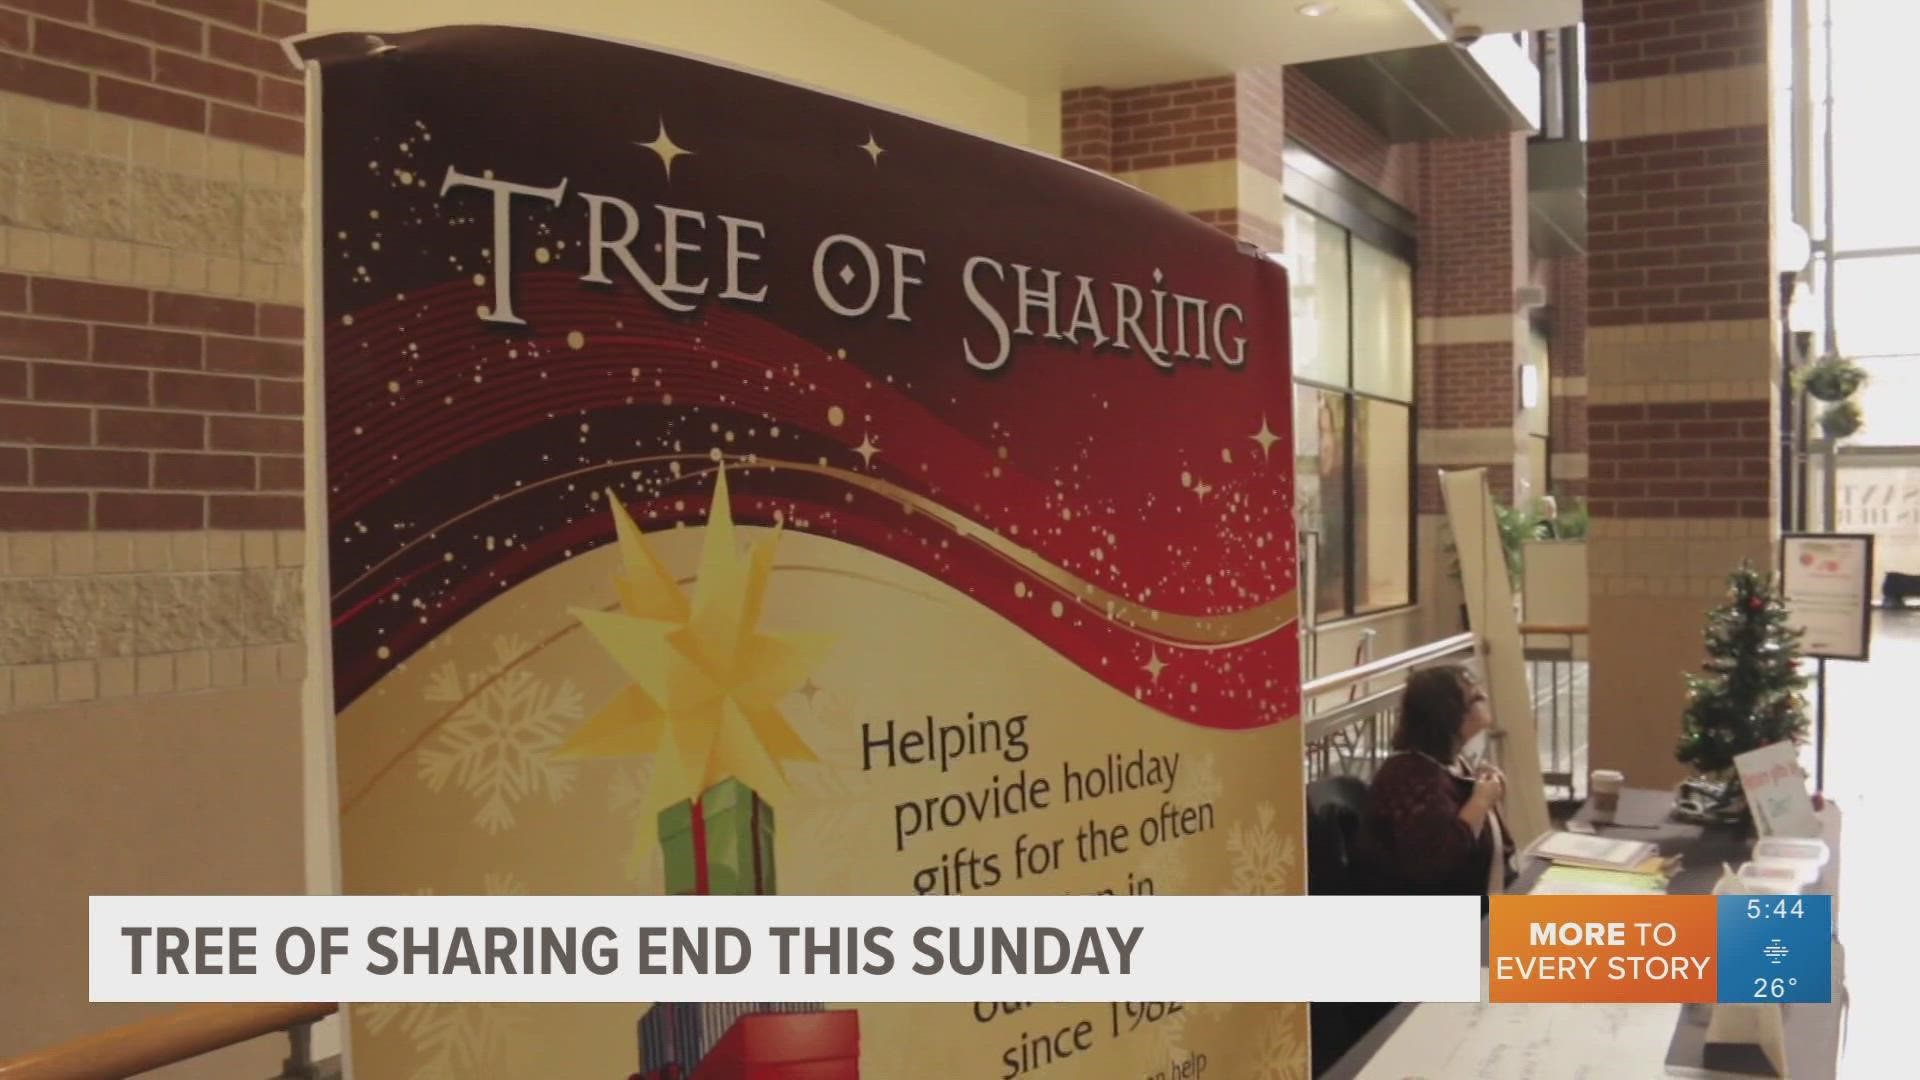 KREM Cares has been working with Tree of Sharing for more than 30 years to bring presents to those who may be forgotten.